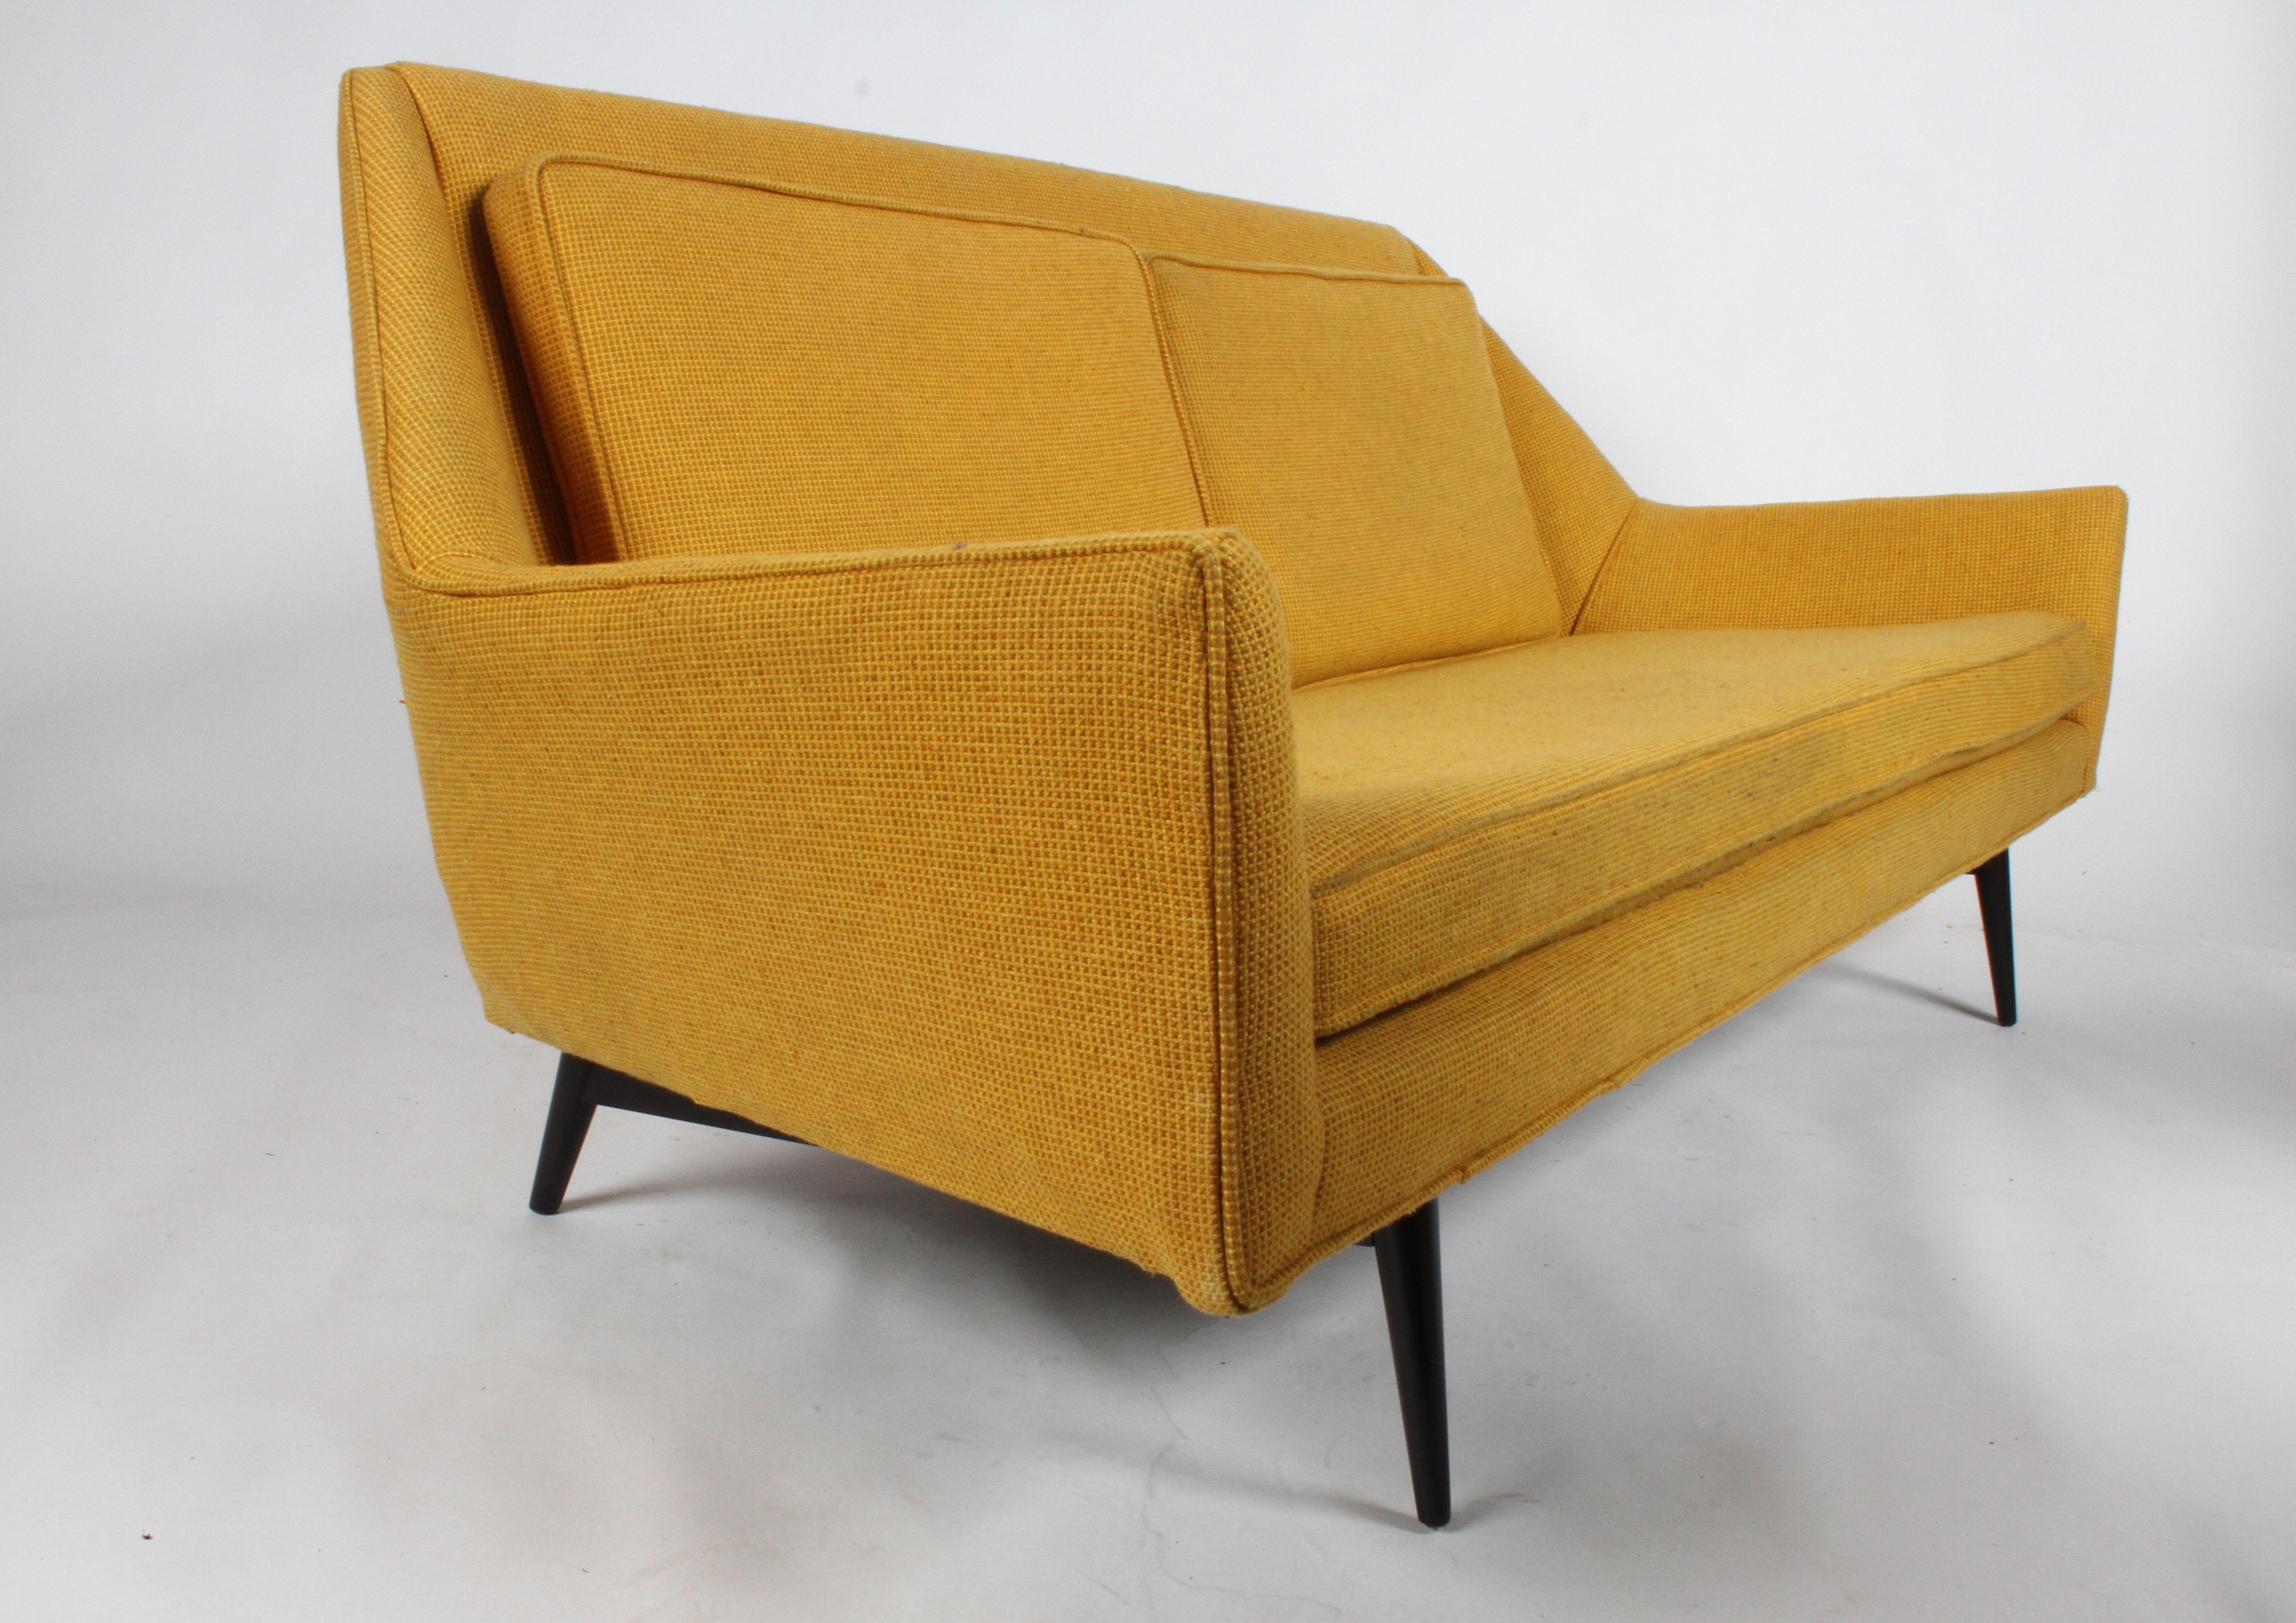 Rare Mid-Century Modern Paul McCobb for Directional Sculptural Cubist Sofa  In Good Condition For Sale In St. Louis, MO